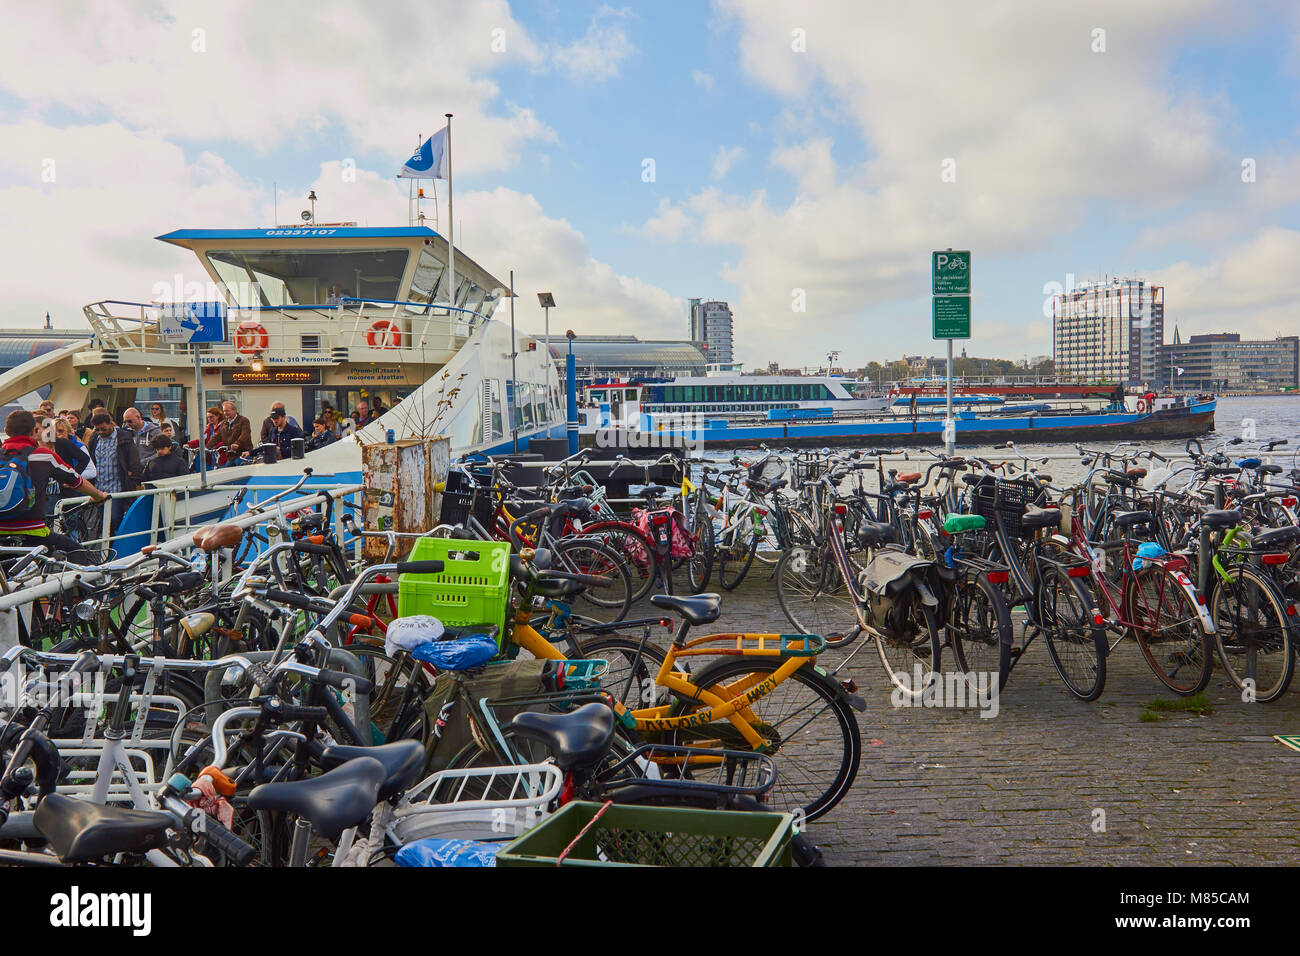 Foot passengers disembarking from ferry and bicycle park, Overhoeks, a new mixed use neighbourhood, Amsterdam, Netherlands Stock Photo